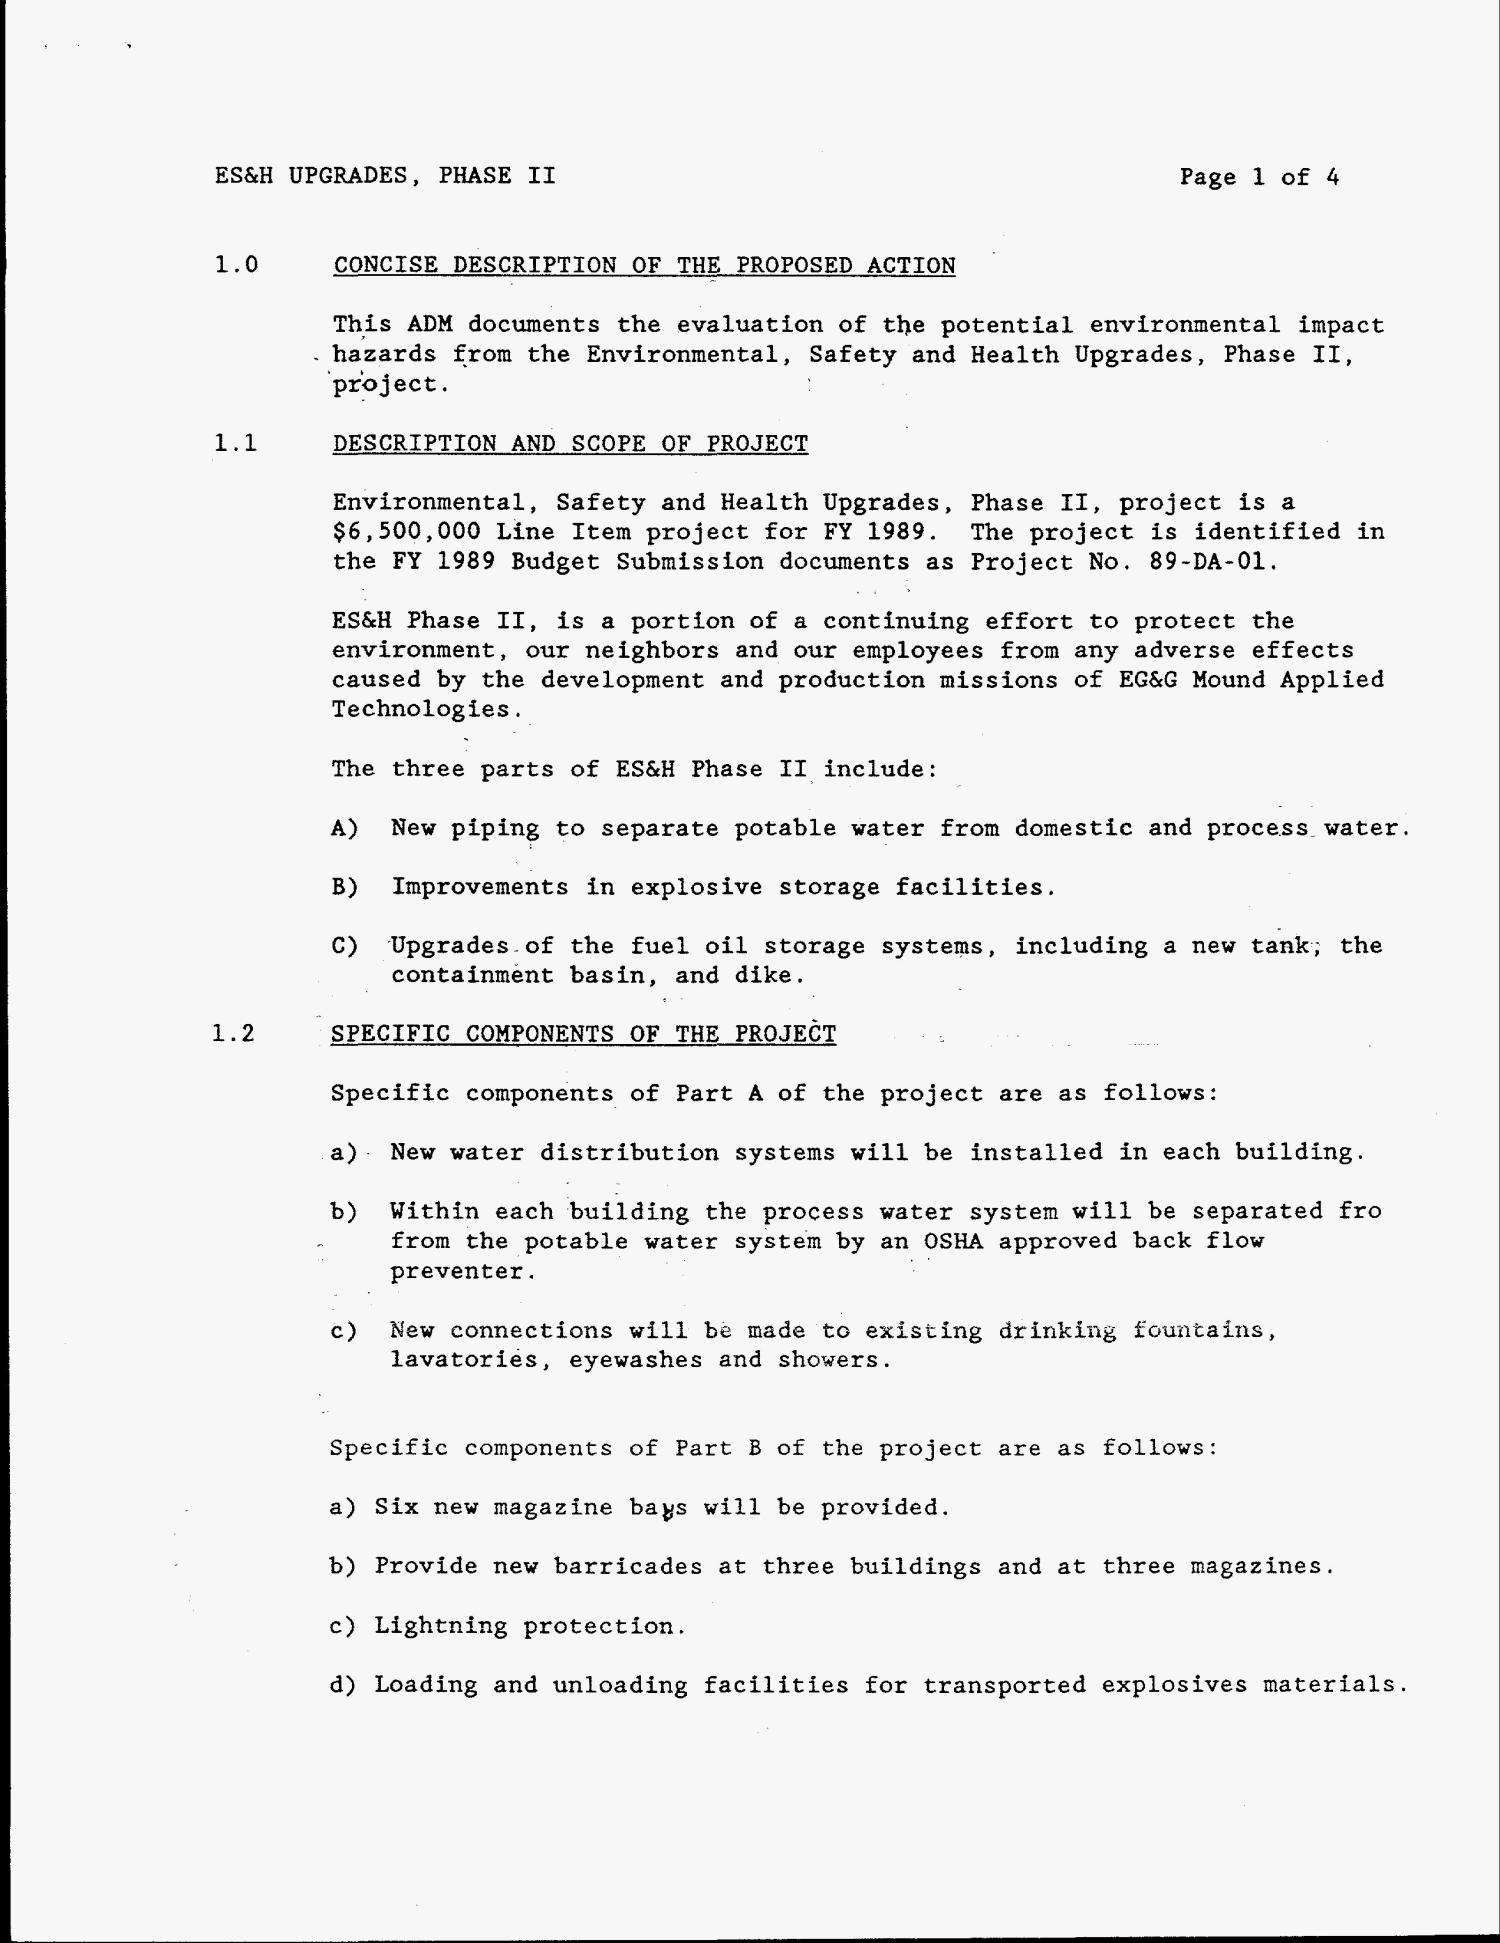 Action Description Memorandum for the FY 1989 Line Item: Environmental, Safety and Health Upgrades, Phase 2
                                                
                                                    [Sequence #]: 4 of 7
                                                